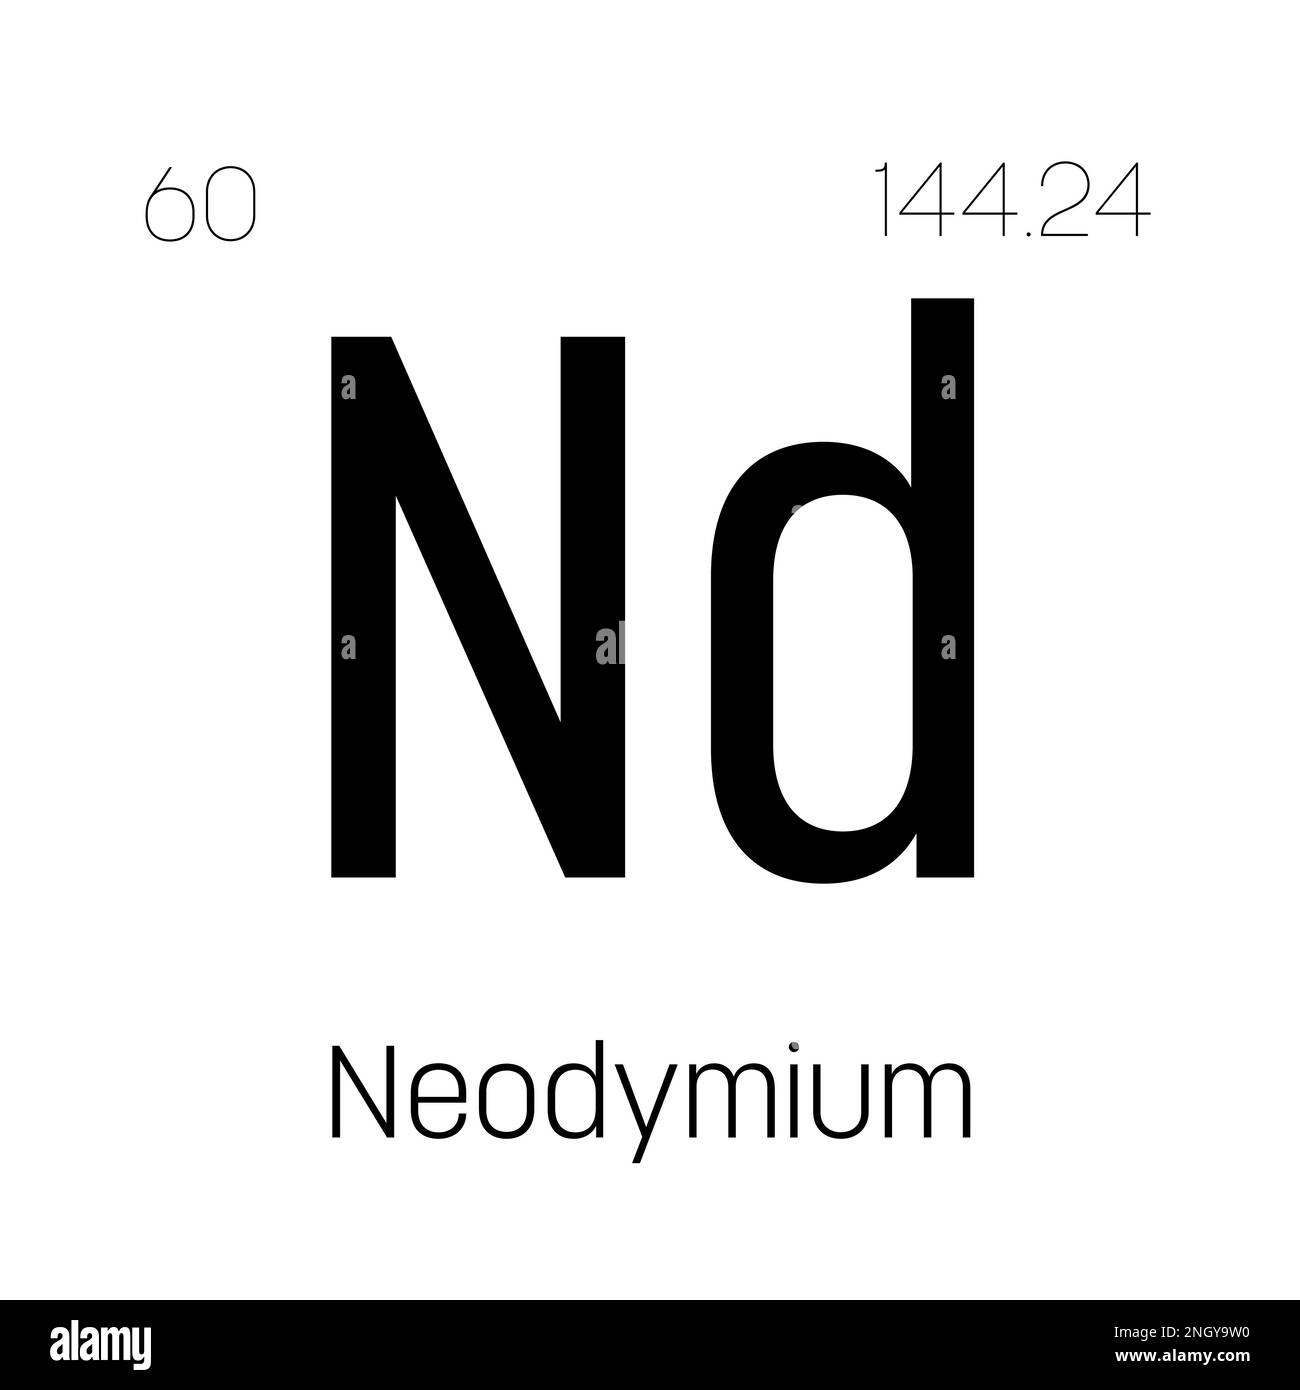 Neodymium, Nd, periodic table element with name, symbol, atomic number and weight. Rare earth metal with various industrial uses, such as in magnets, lasers, and as a component in certain types of glass. Stock Vector